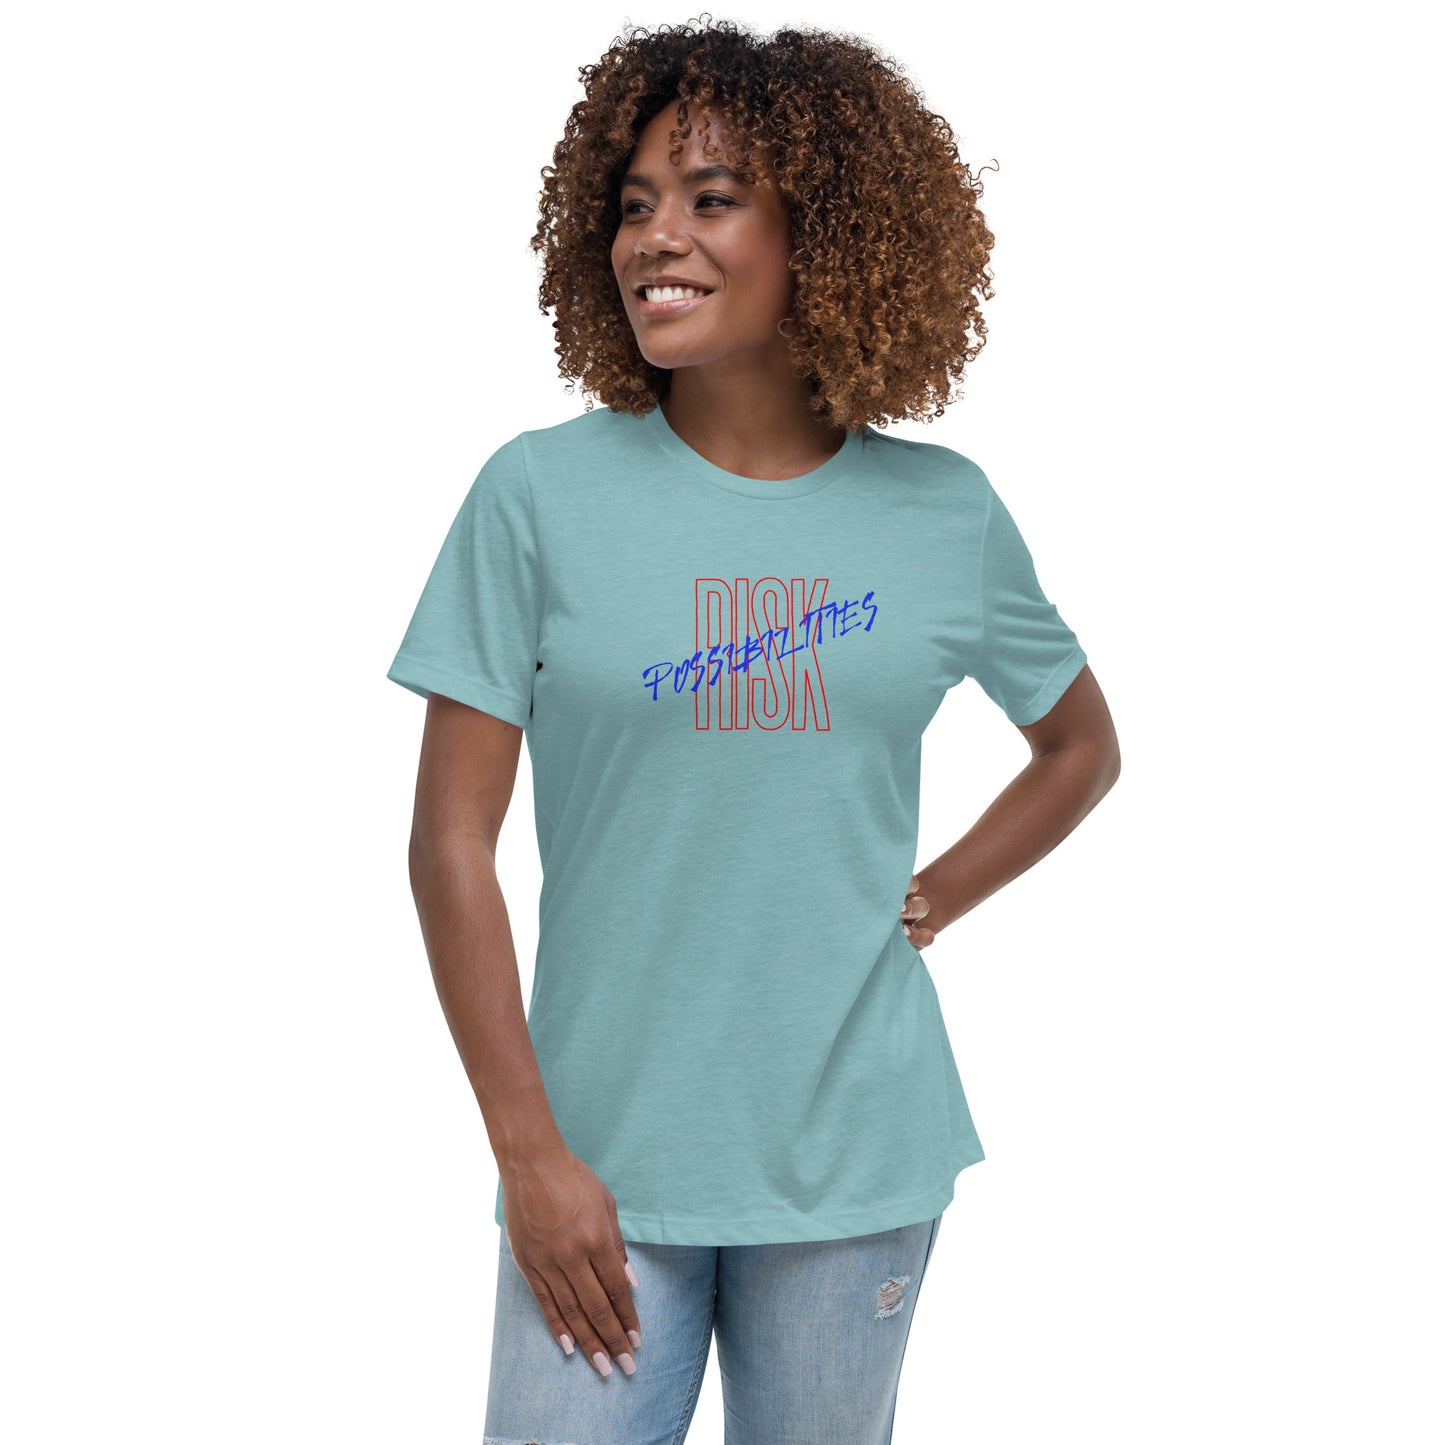 Risk / Possibilities Women's Relaxed T-Shirt